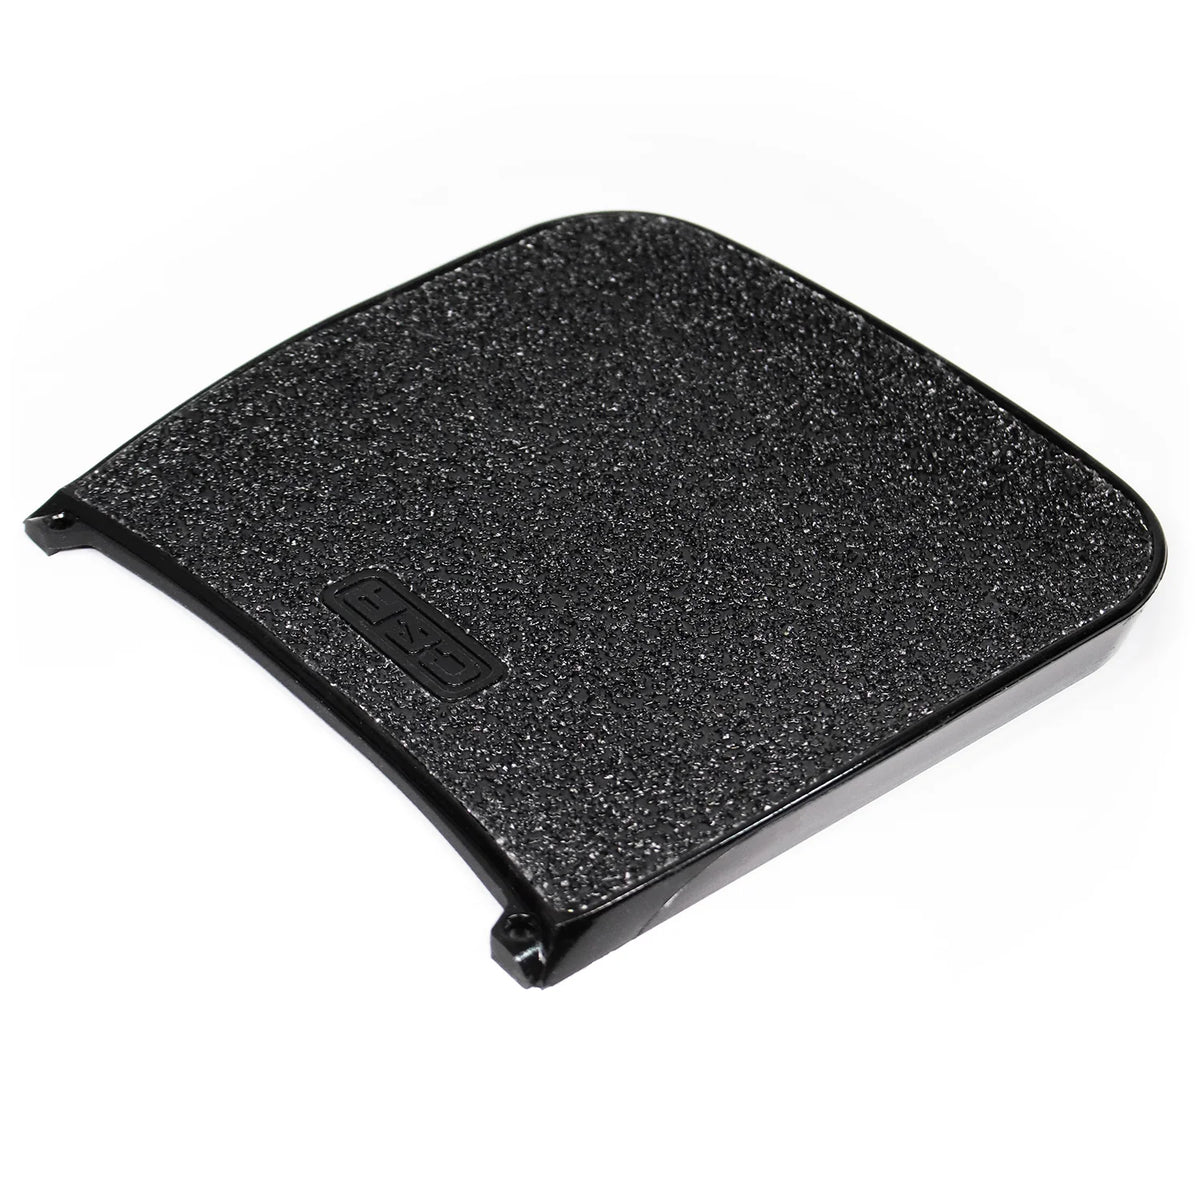 Craft&amp;Ride Air Pad Concave Foot Pad with Gel-Tech